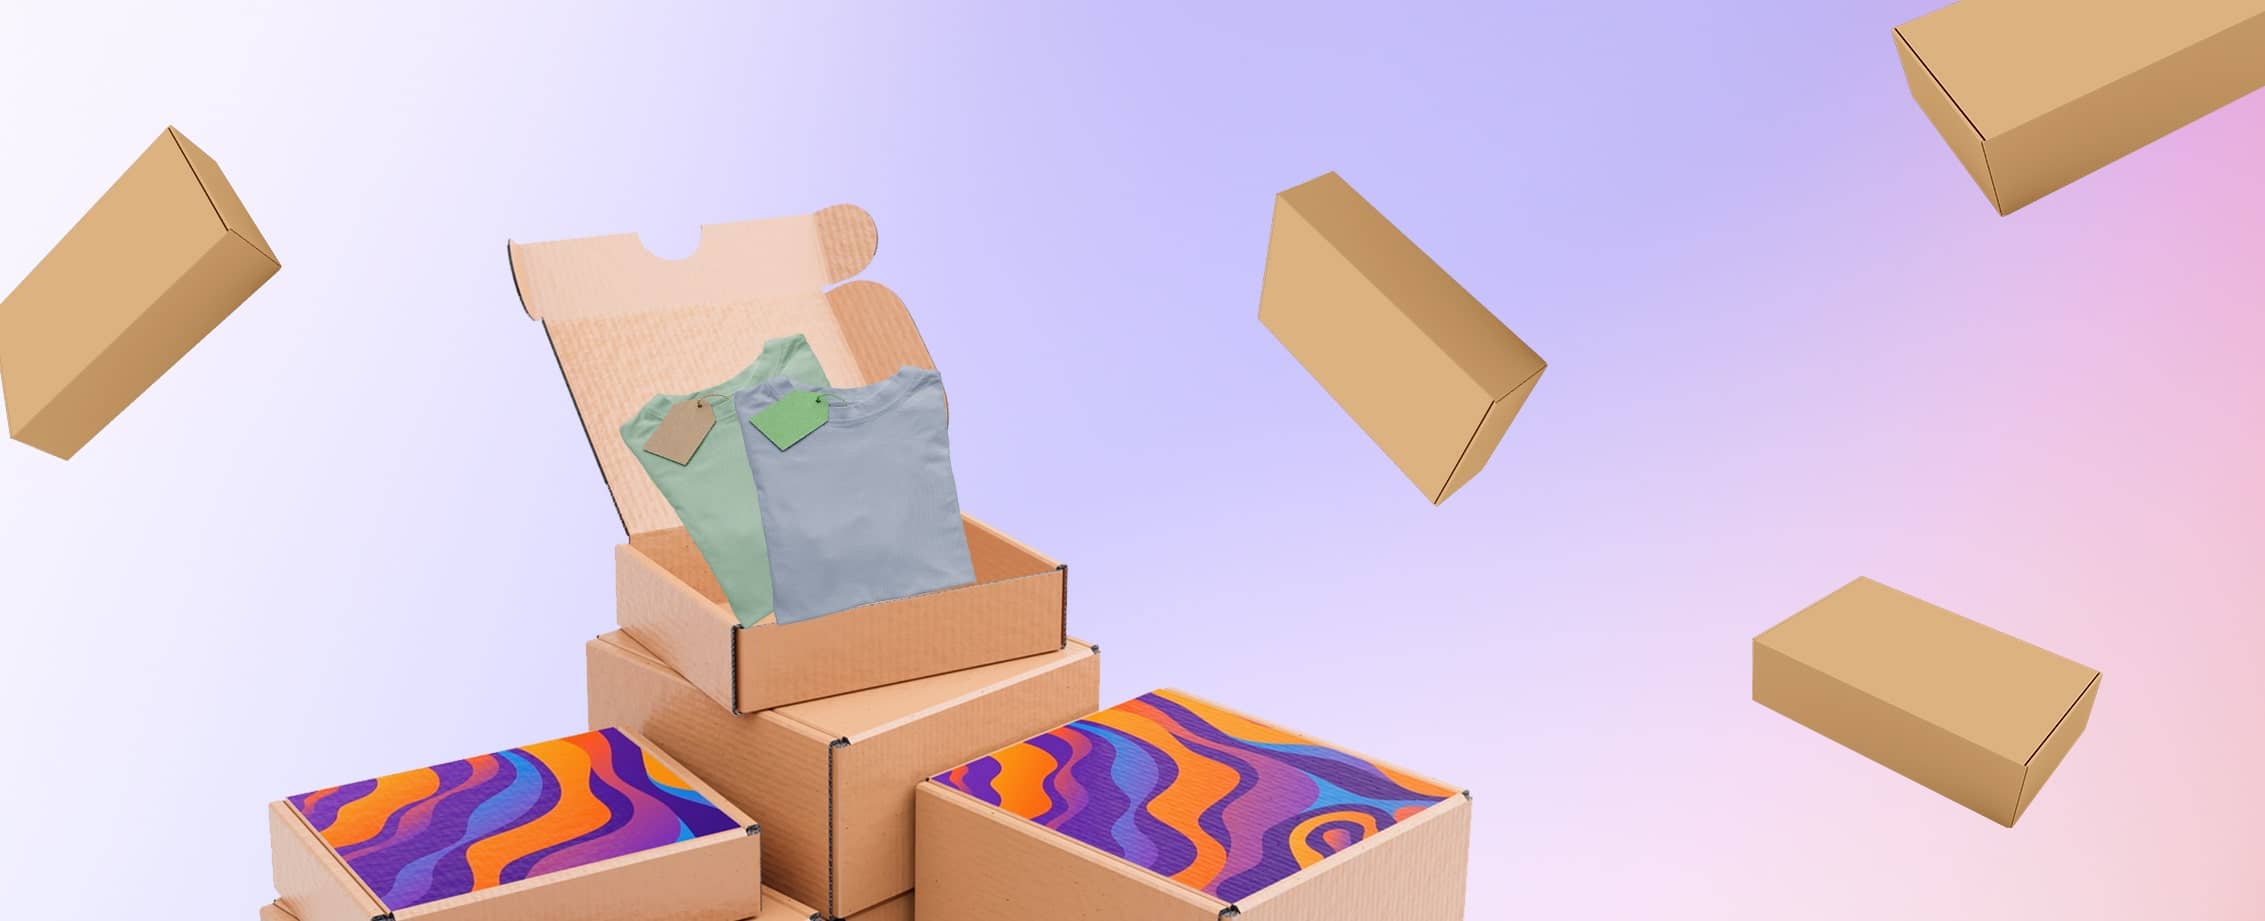 A stack of boxes with colorful designs for an e-commerce retailer.